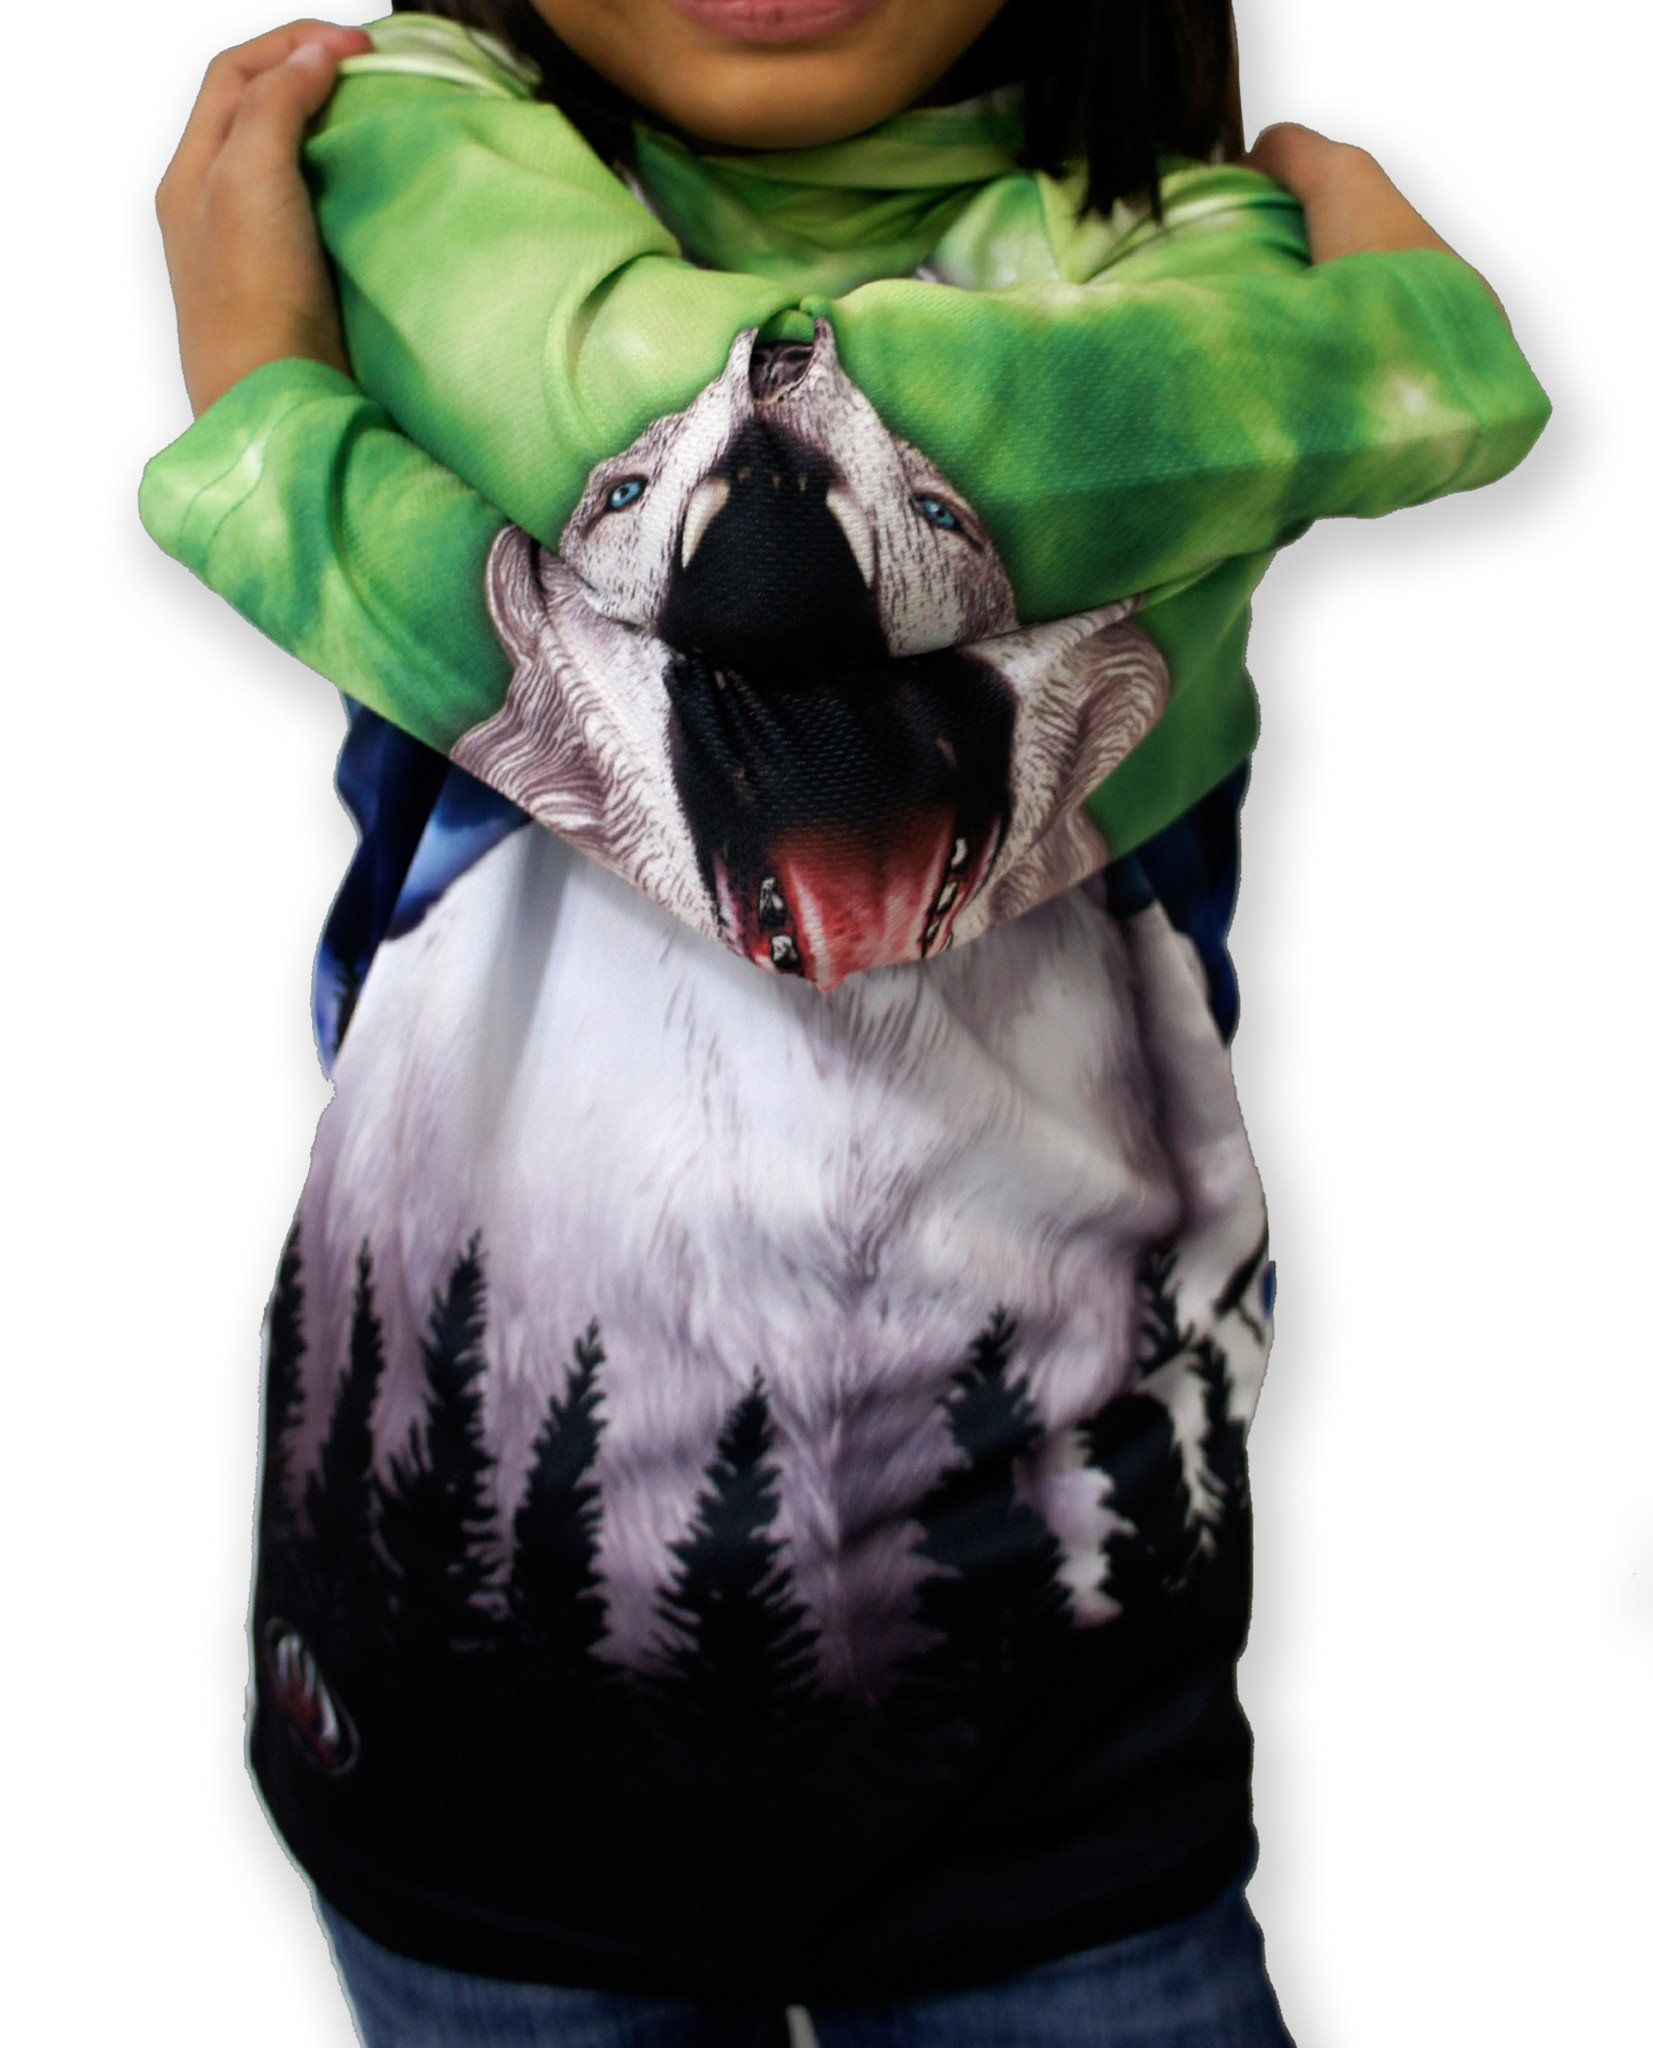 HOWLING WOLF Hoodie Chomp Shirt by MOUTHMAN® Kid's Clothing 